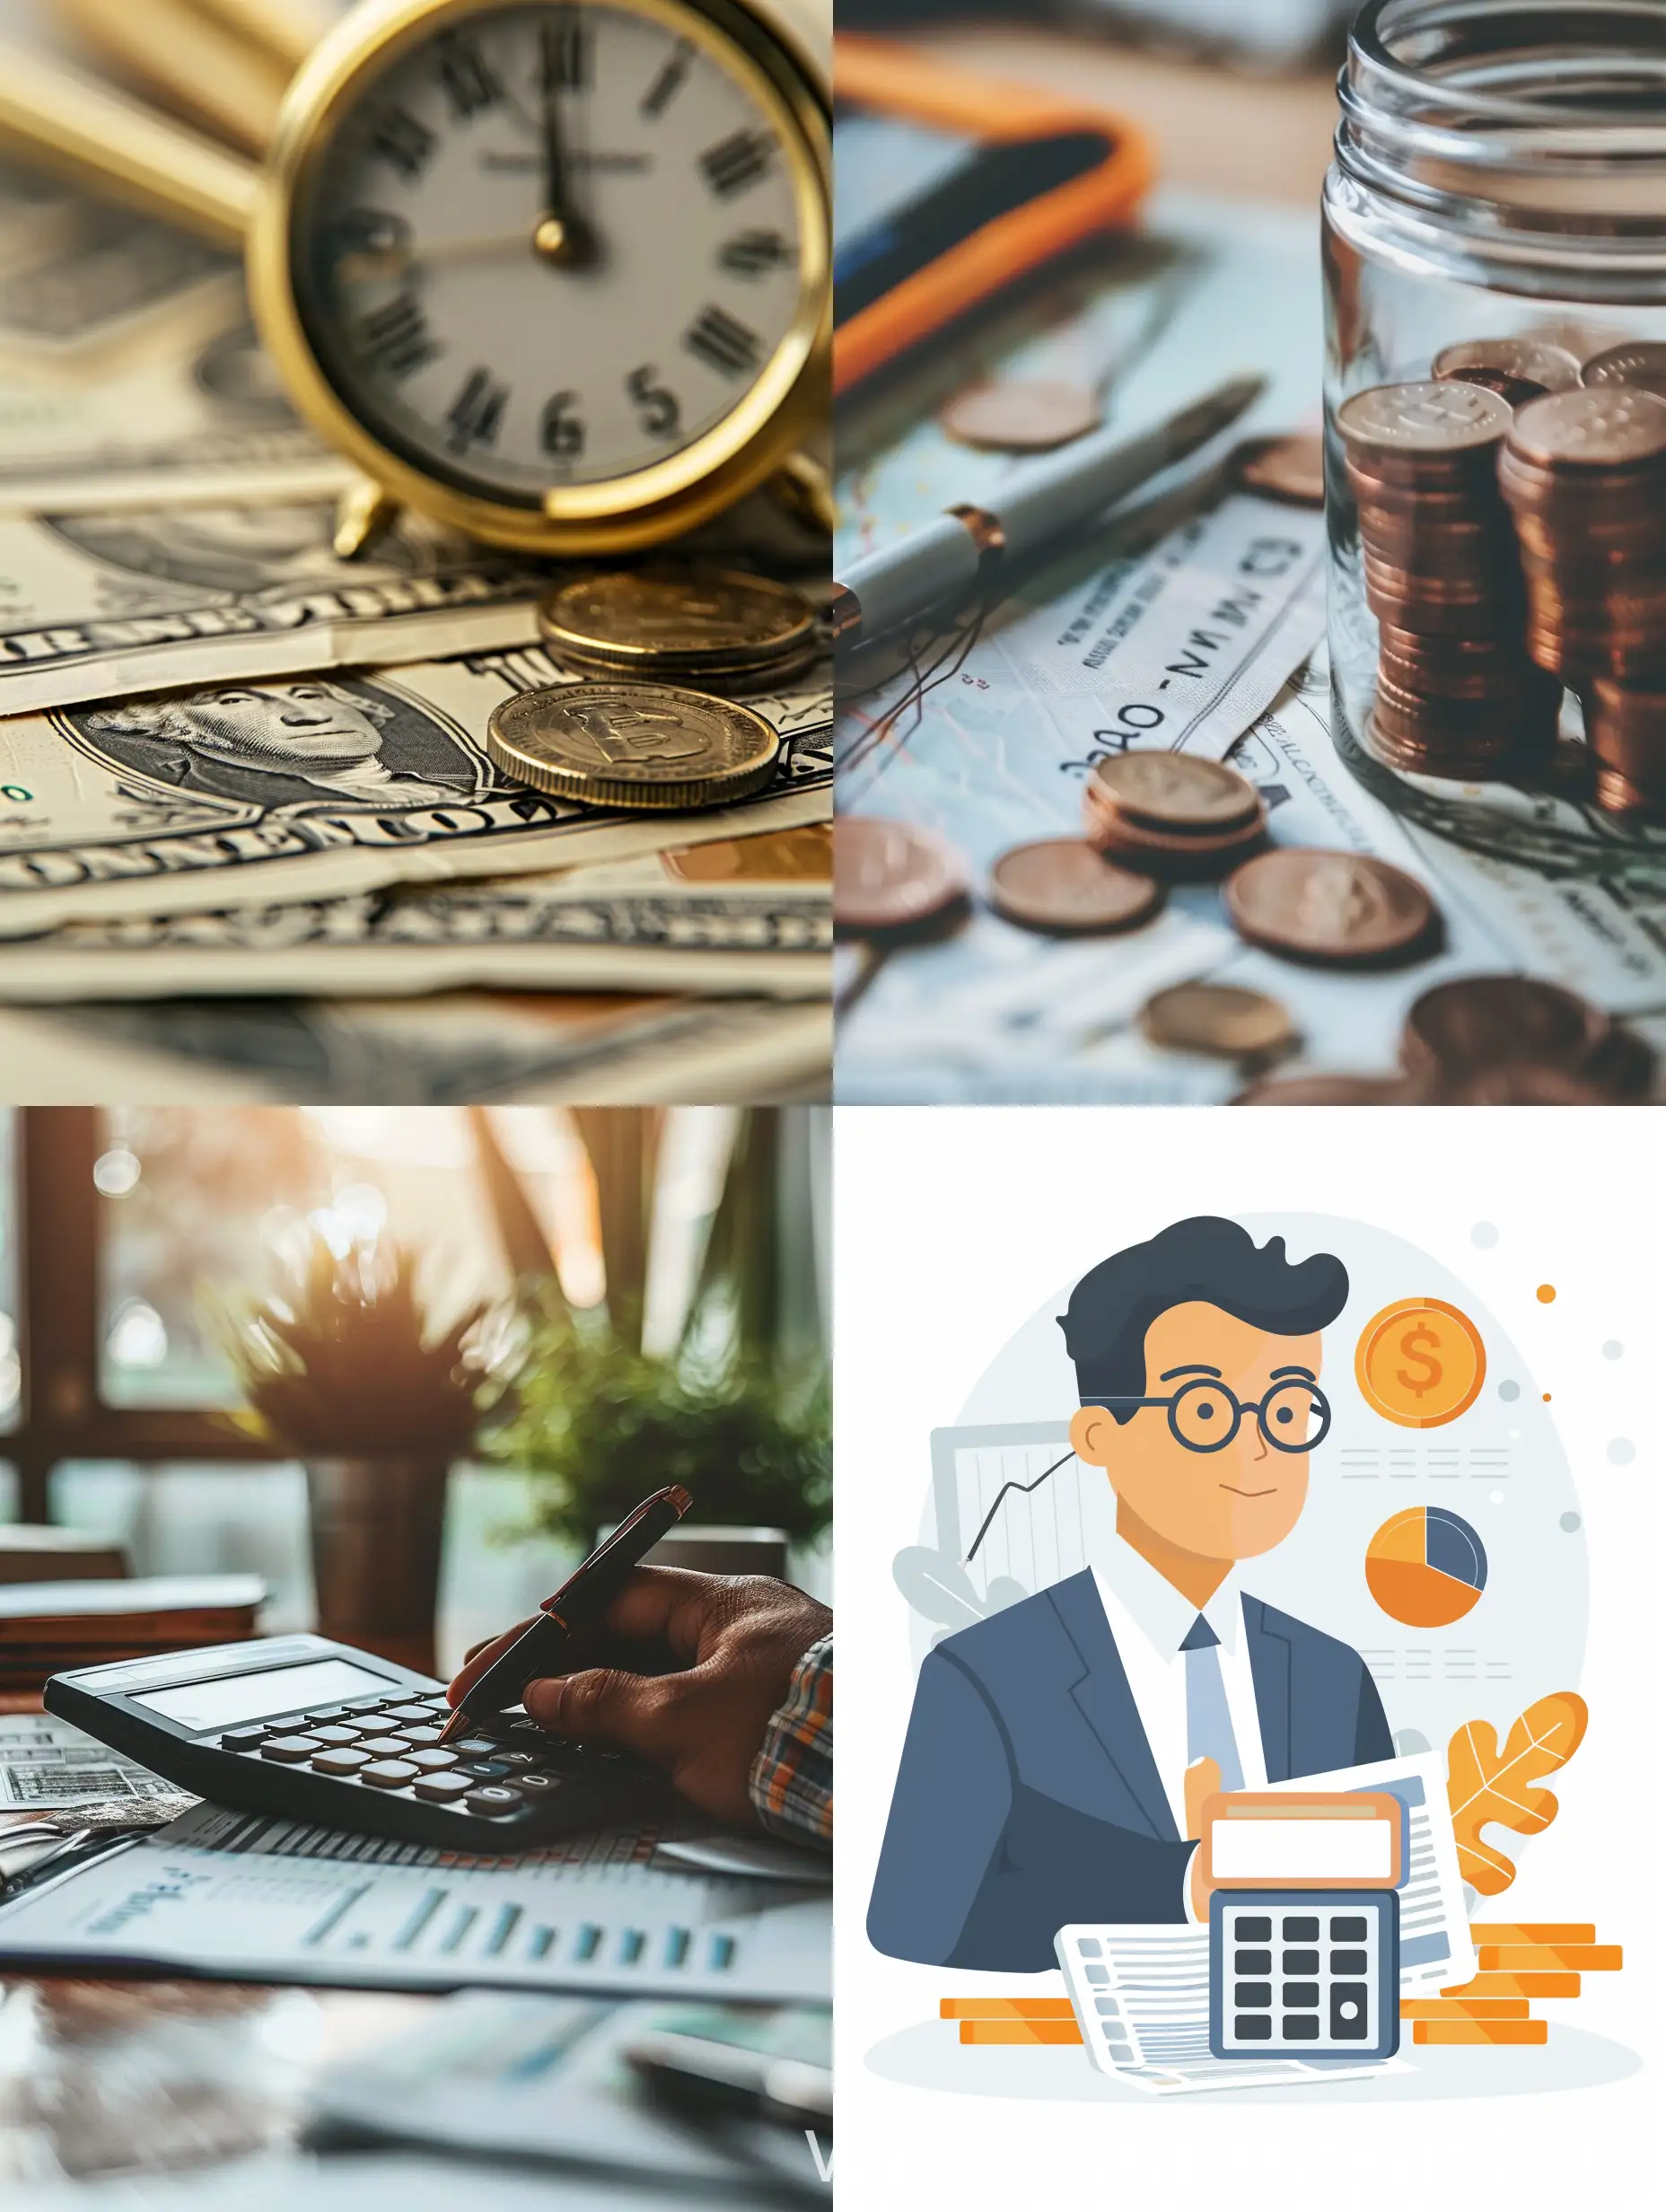 Create an image about finances